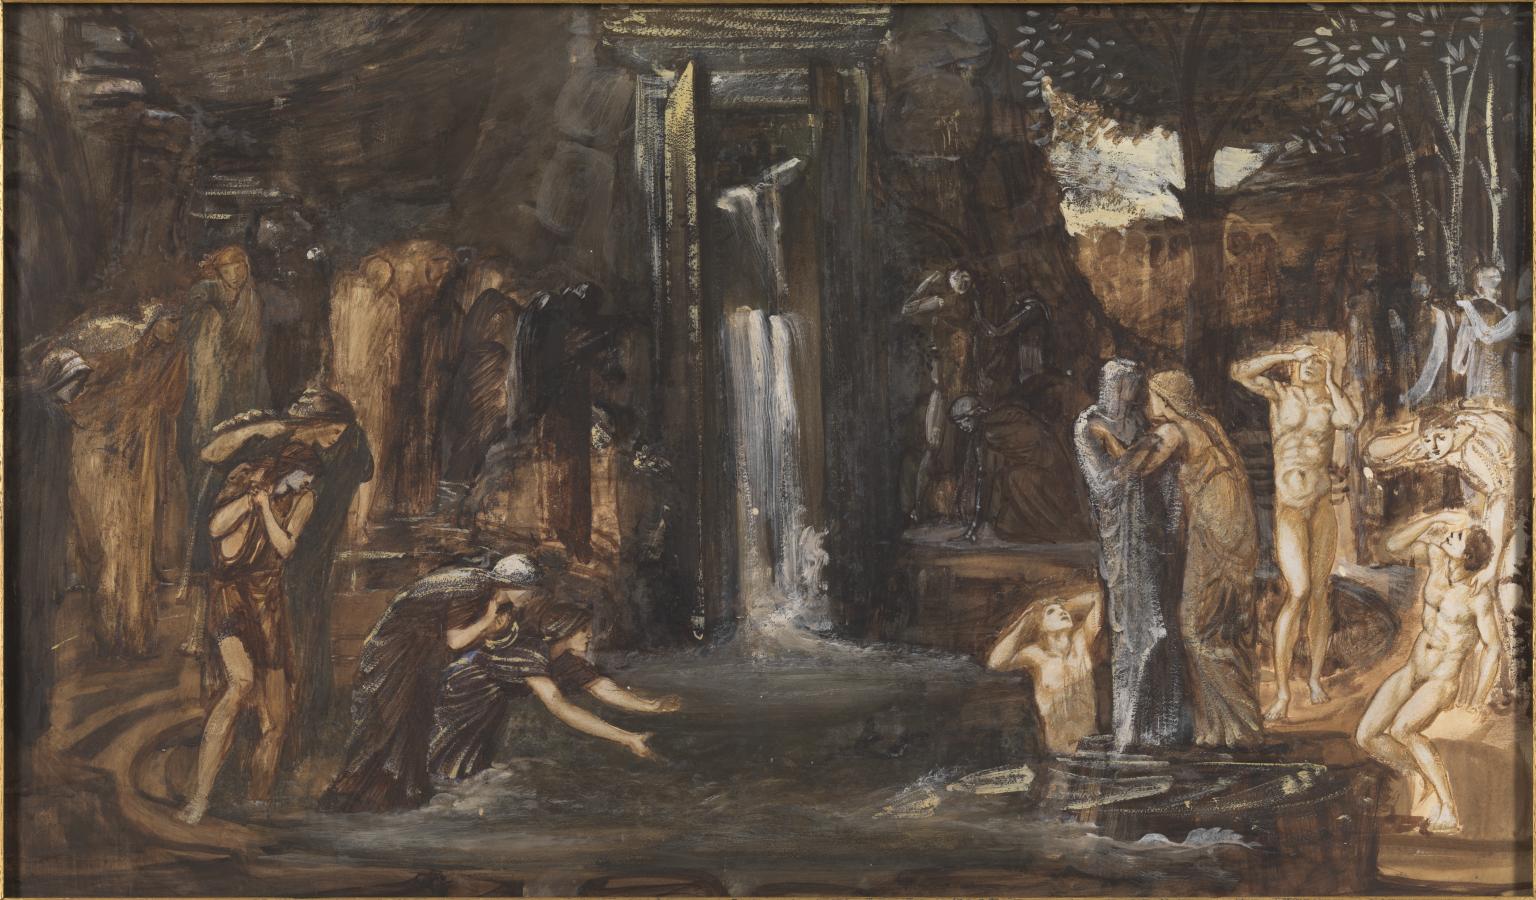 A painting depicting the fountain of youth.